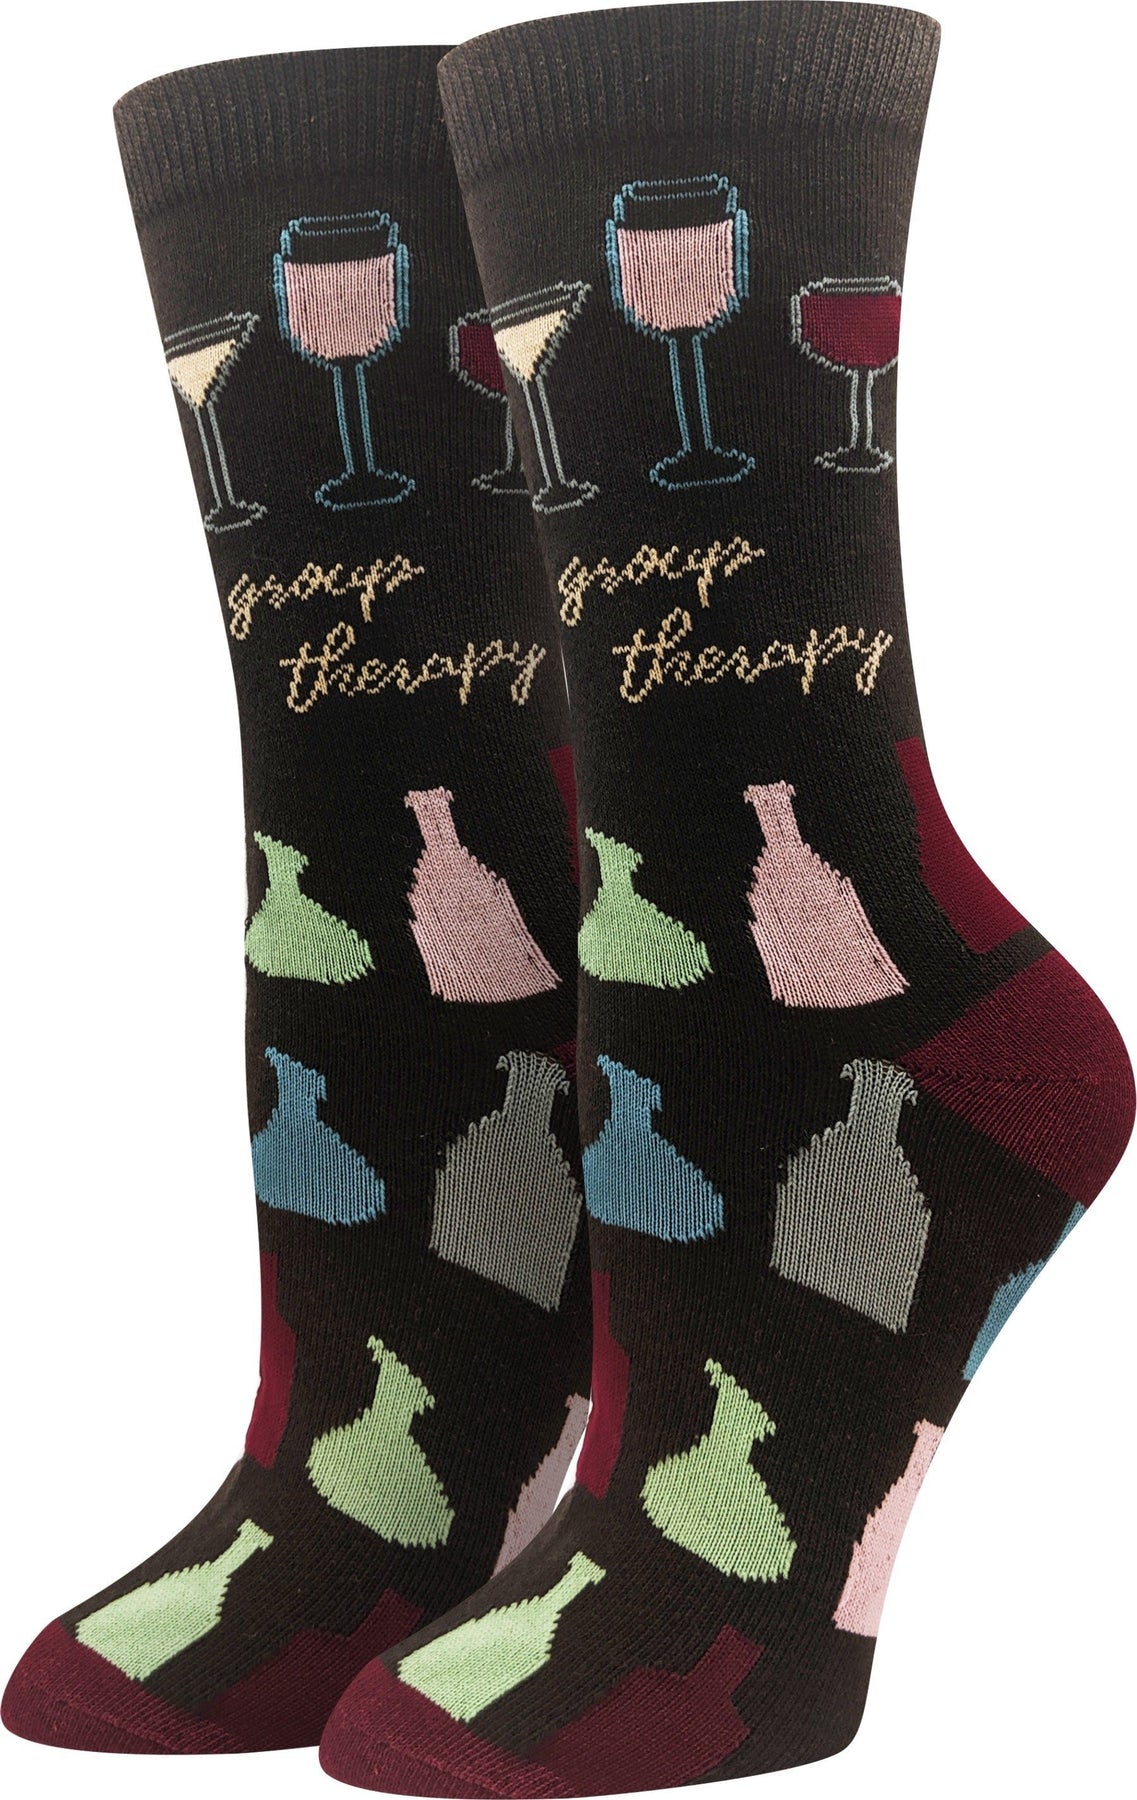 Sock Harbor - "Group Therapy" Drink Crew Socks | Women's - Knock Your Socks Off